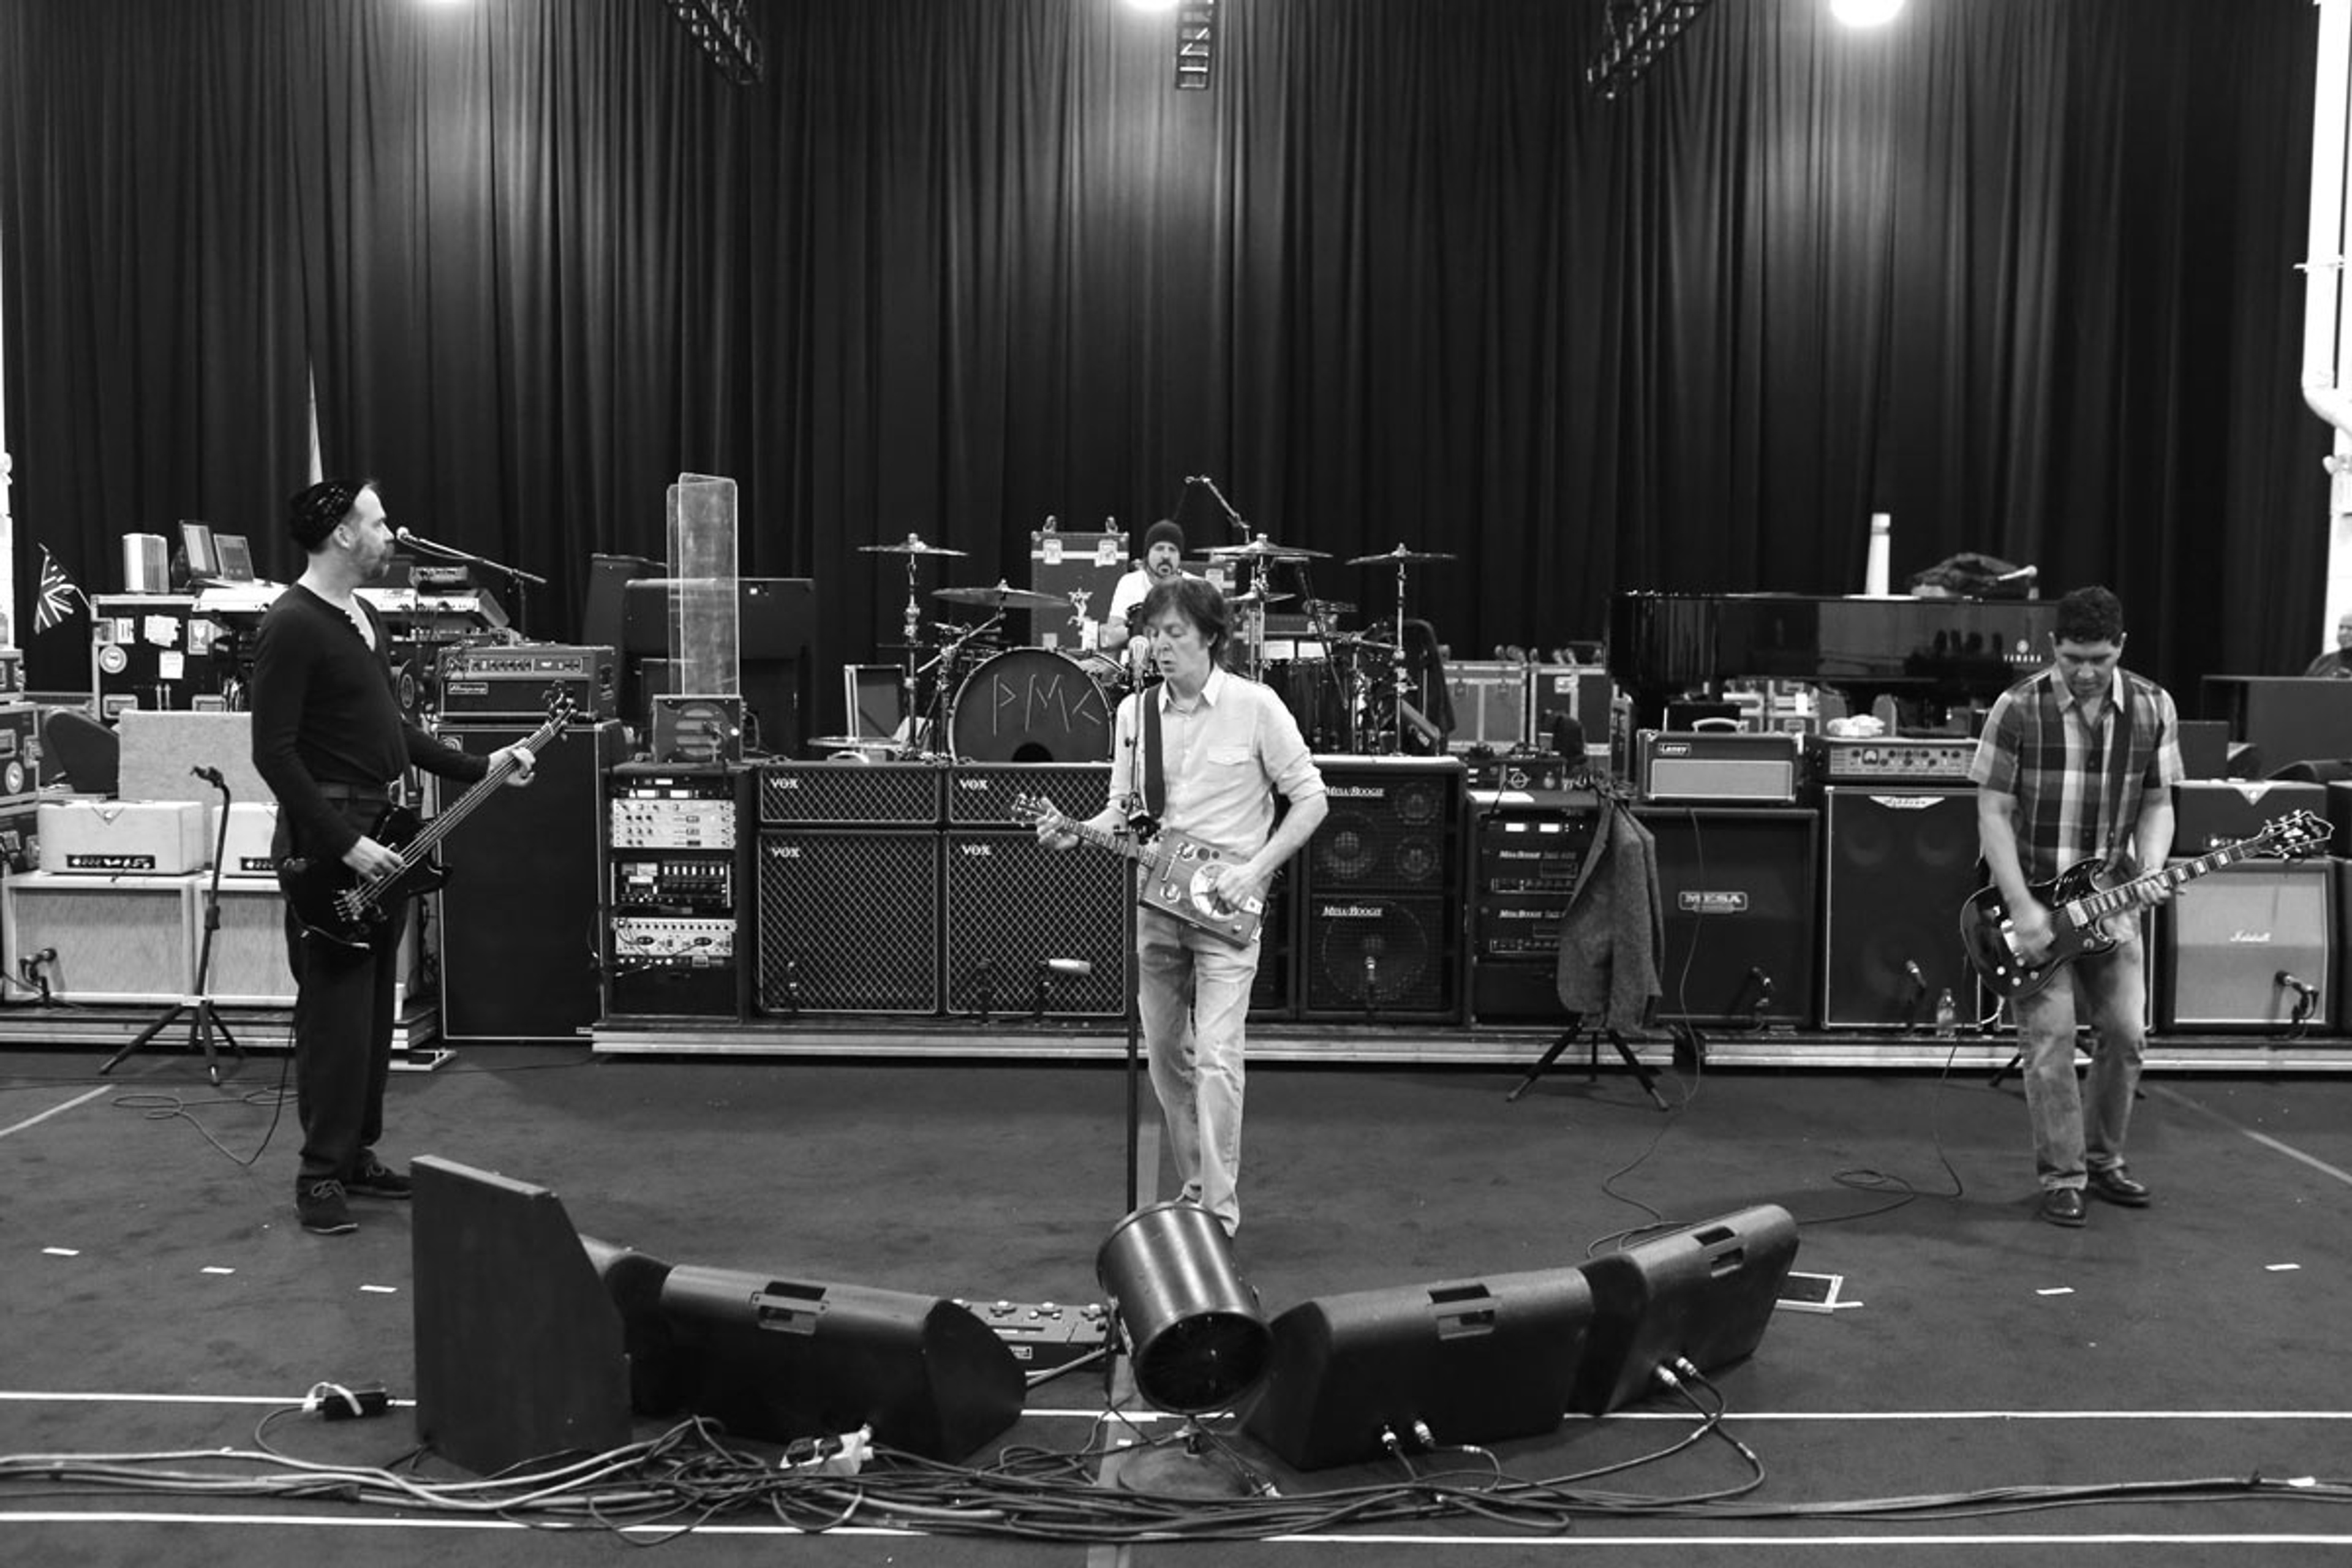 Paul rehearsing with (from l-r) Krist Novoselic, Dave Grohl and Pat Smear, 12-12-12 Hurricane Sandy Benefit, Madison Square Garden, NYC, 10th December 2012